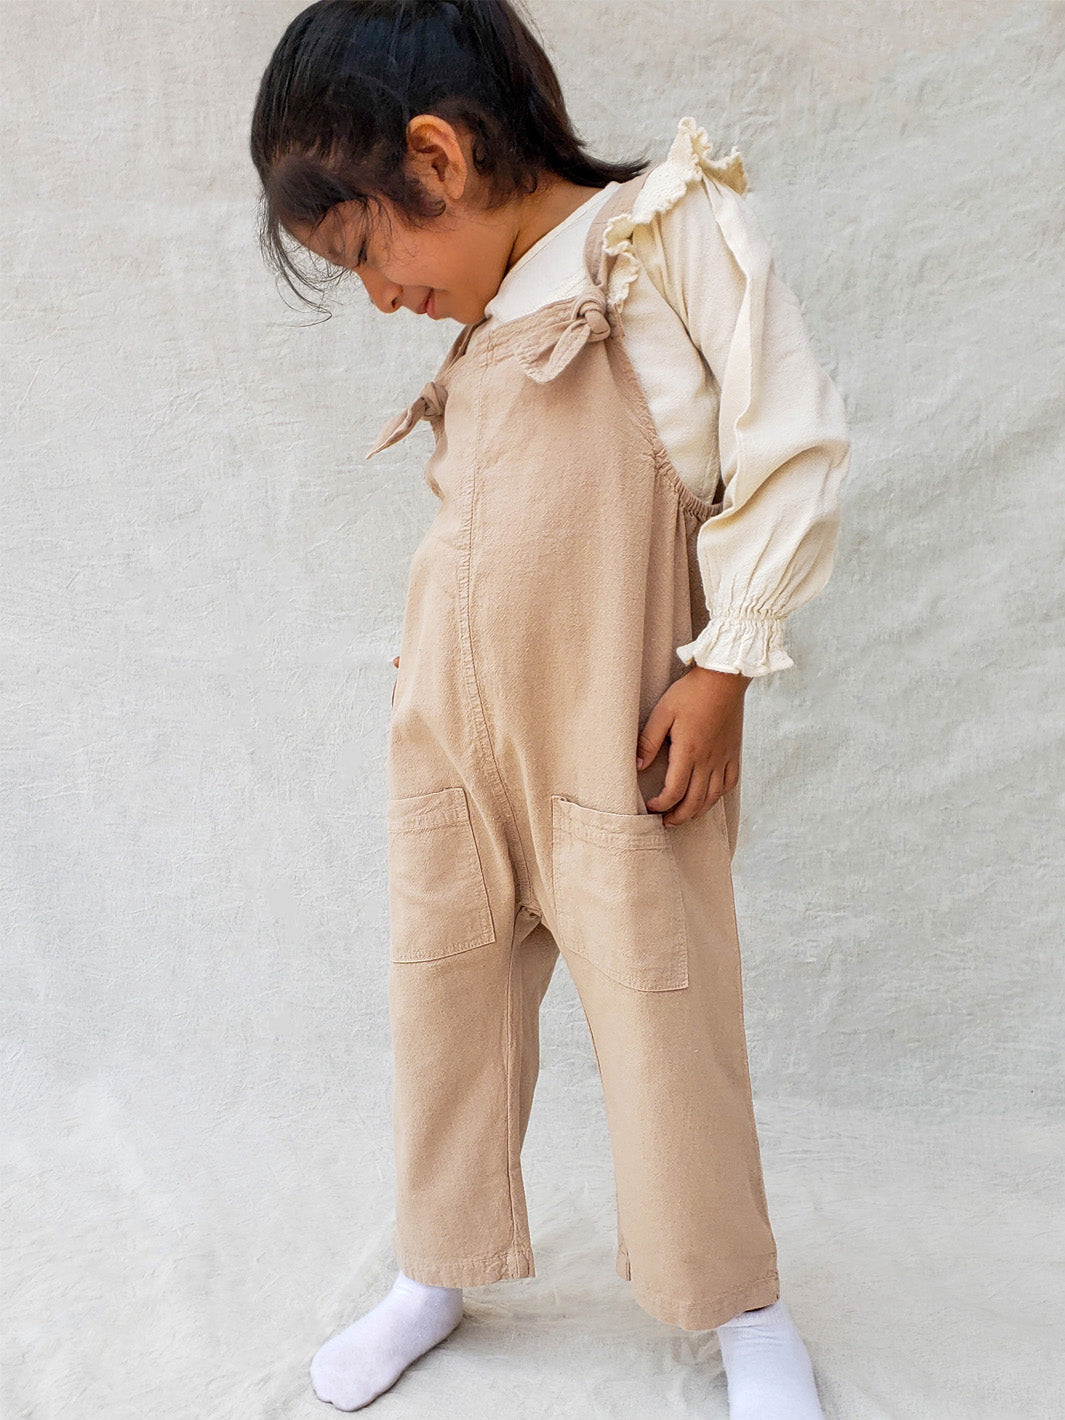 Liten Aventuris Natural Tocuyo Cotton overall for kids. Comfortable, loose-fitting and perfect for the sunny days. The Oske Overall brings 2 big pockets and adjustable straps. Perfect for boys and girls. Barnkläder, Bomullskläder, Natural kläder Hängselbyxor.